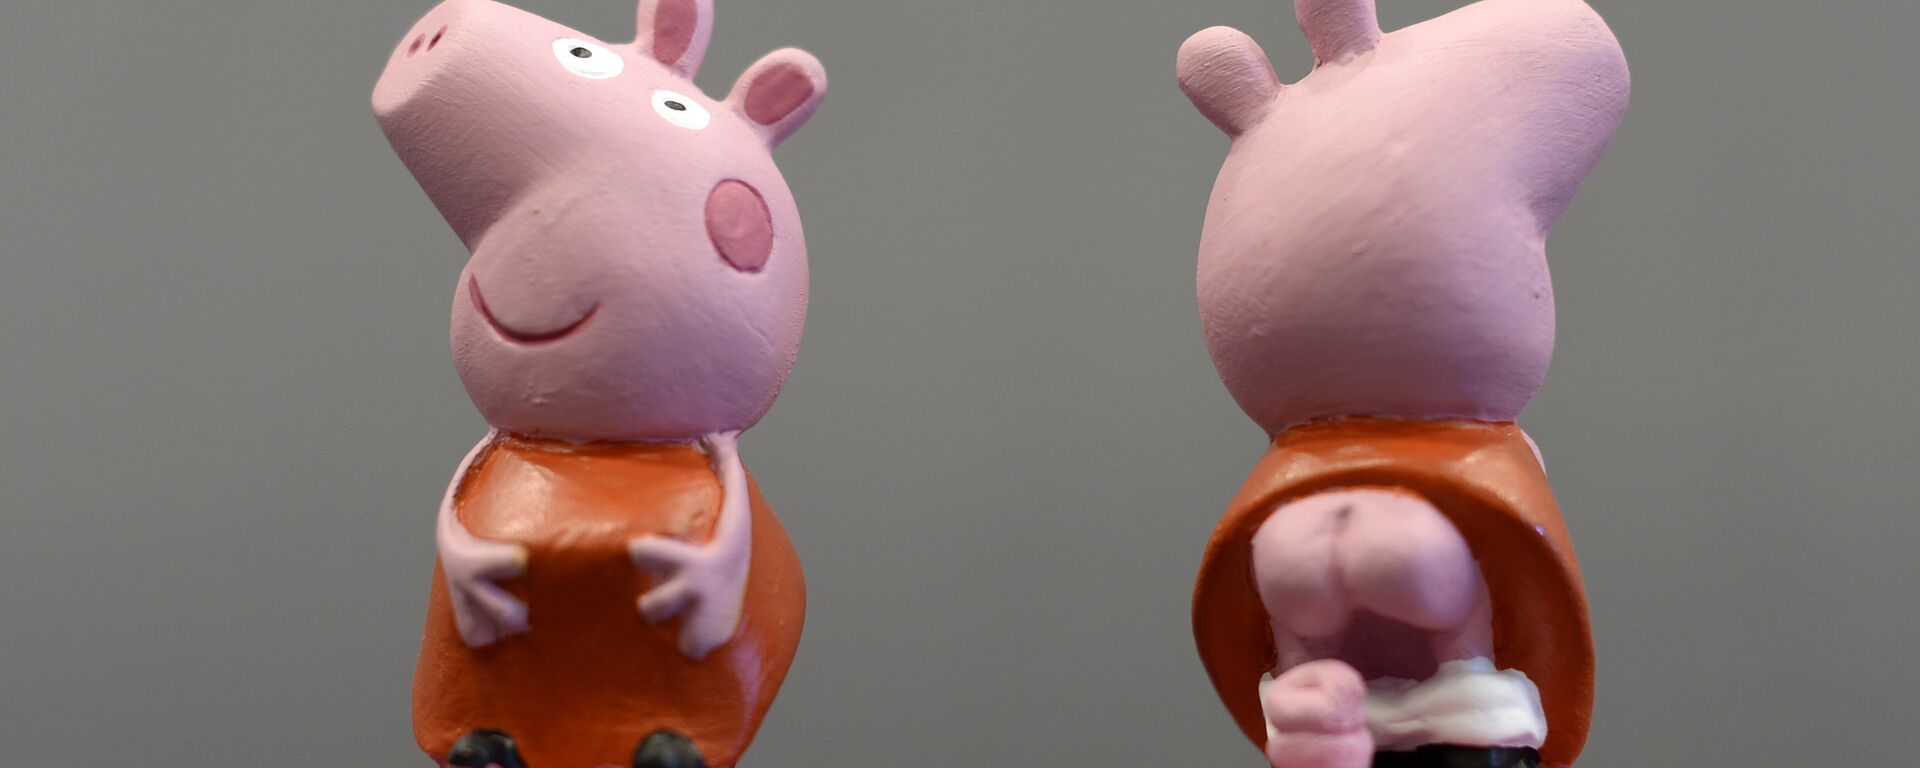 Ceramic figurines of British children's animated TV serie character Peppa Pig called Caganers are pictured during their presentation in Torroella de Montgri, near Gerona on November 15, 2013. - Sputnik International, 1920, 12.12.2017